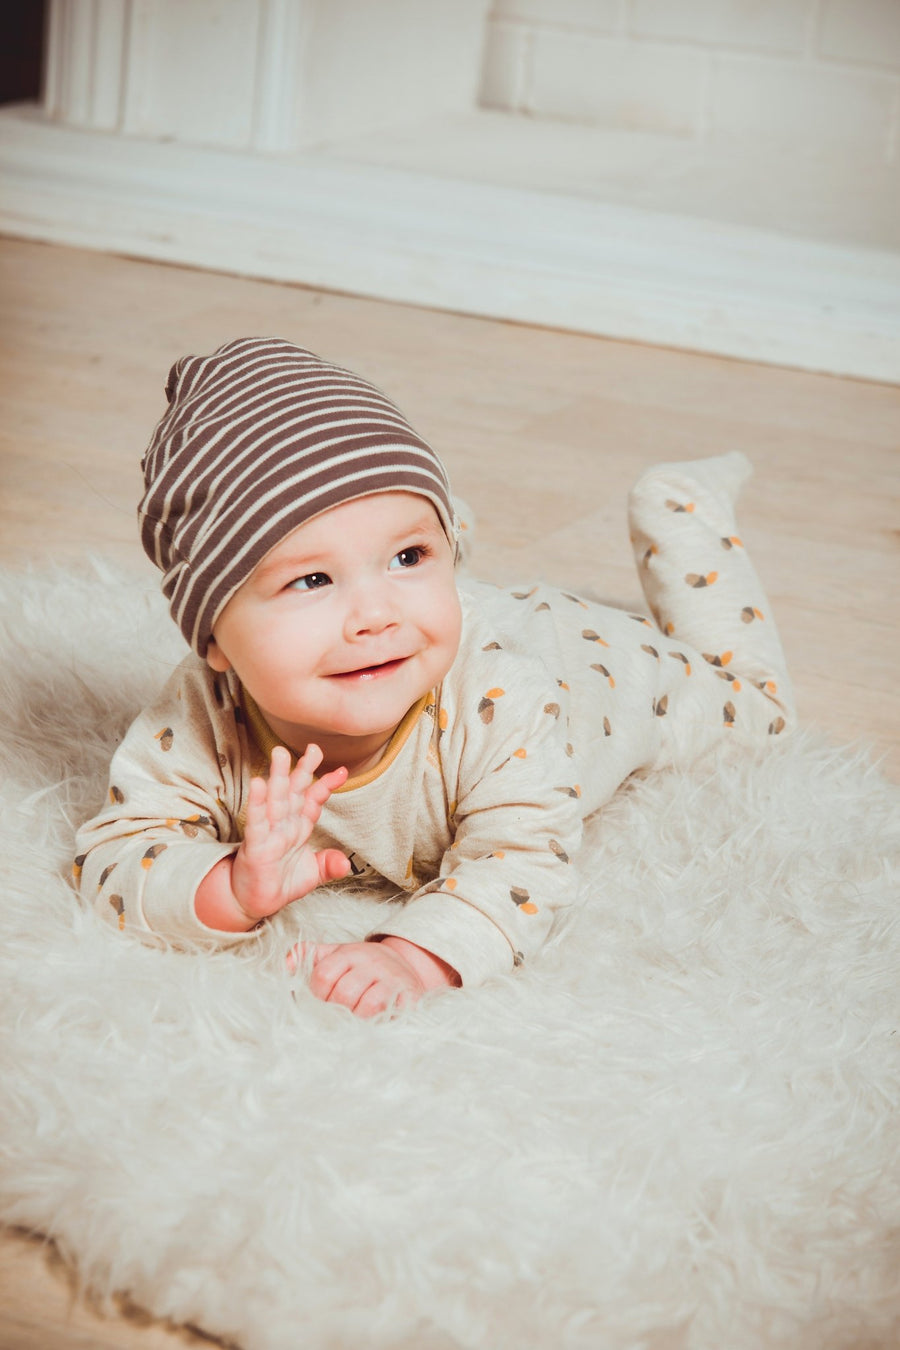 Complete List of Daycare Essentials for Infants - The Baby's Brew